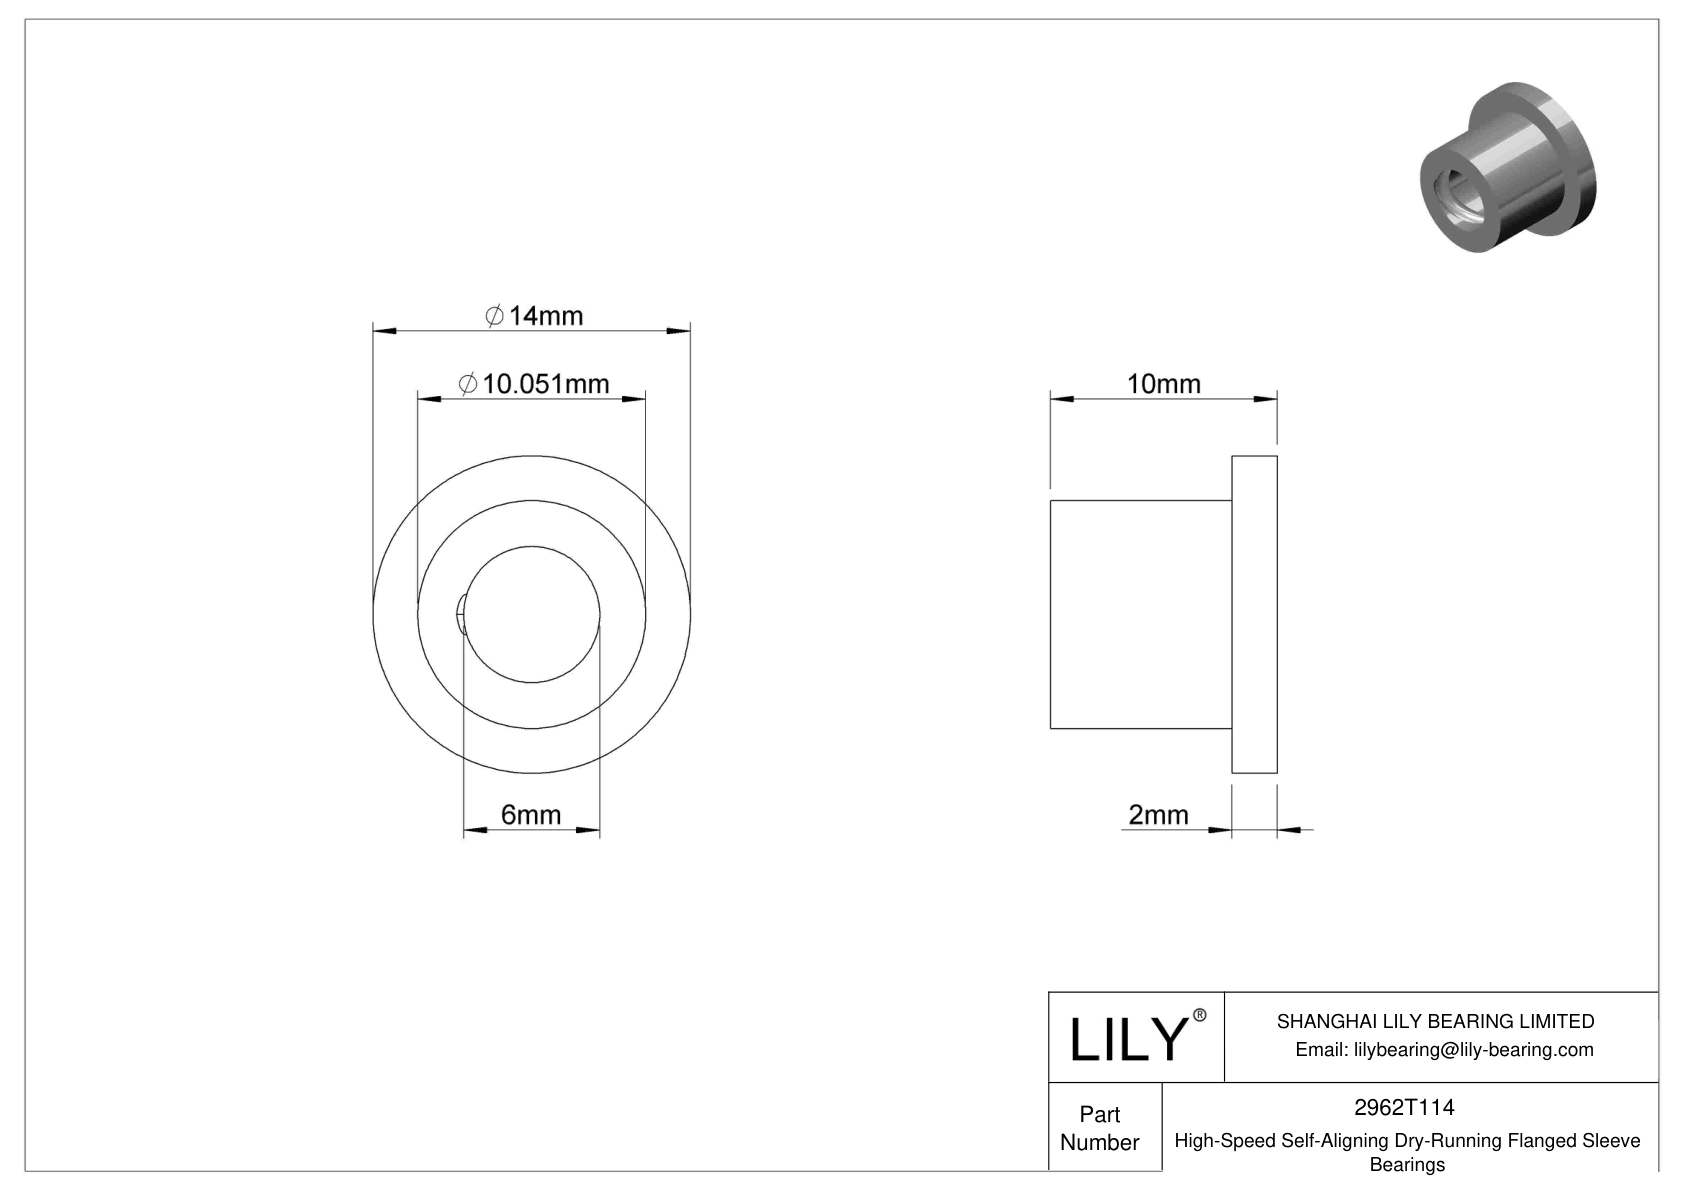 CJGCTBBE High-Temperature Dry-Running Flanged Sleeve Bearings cad drawing